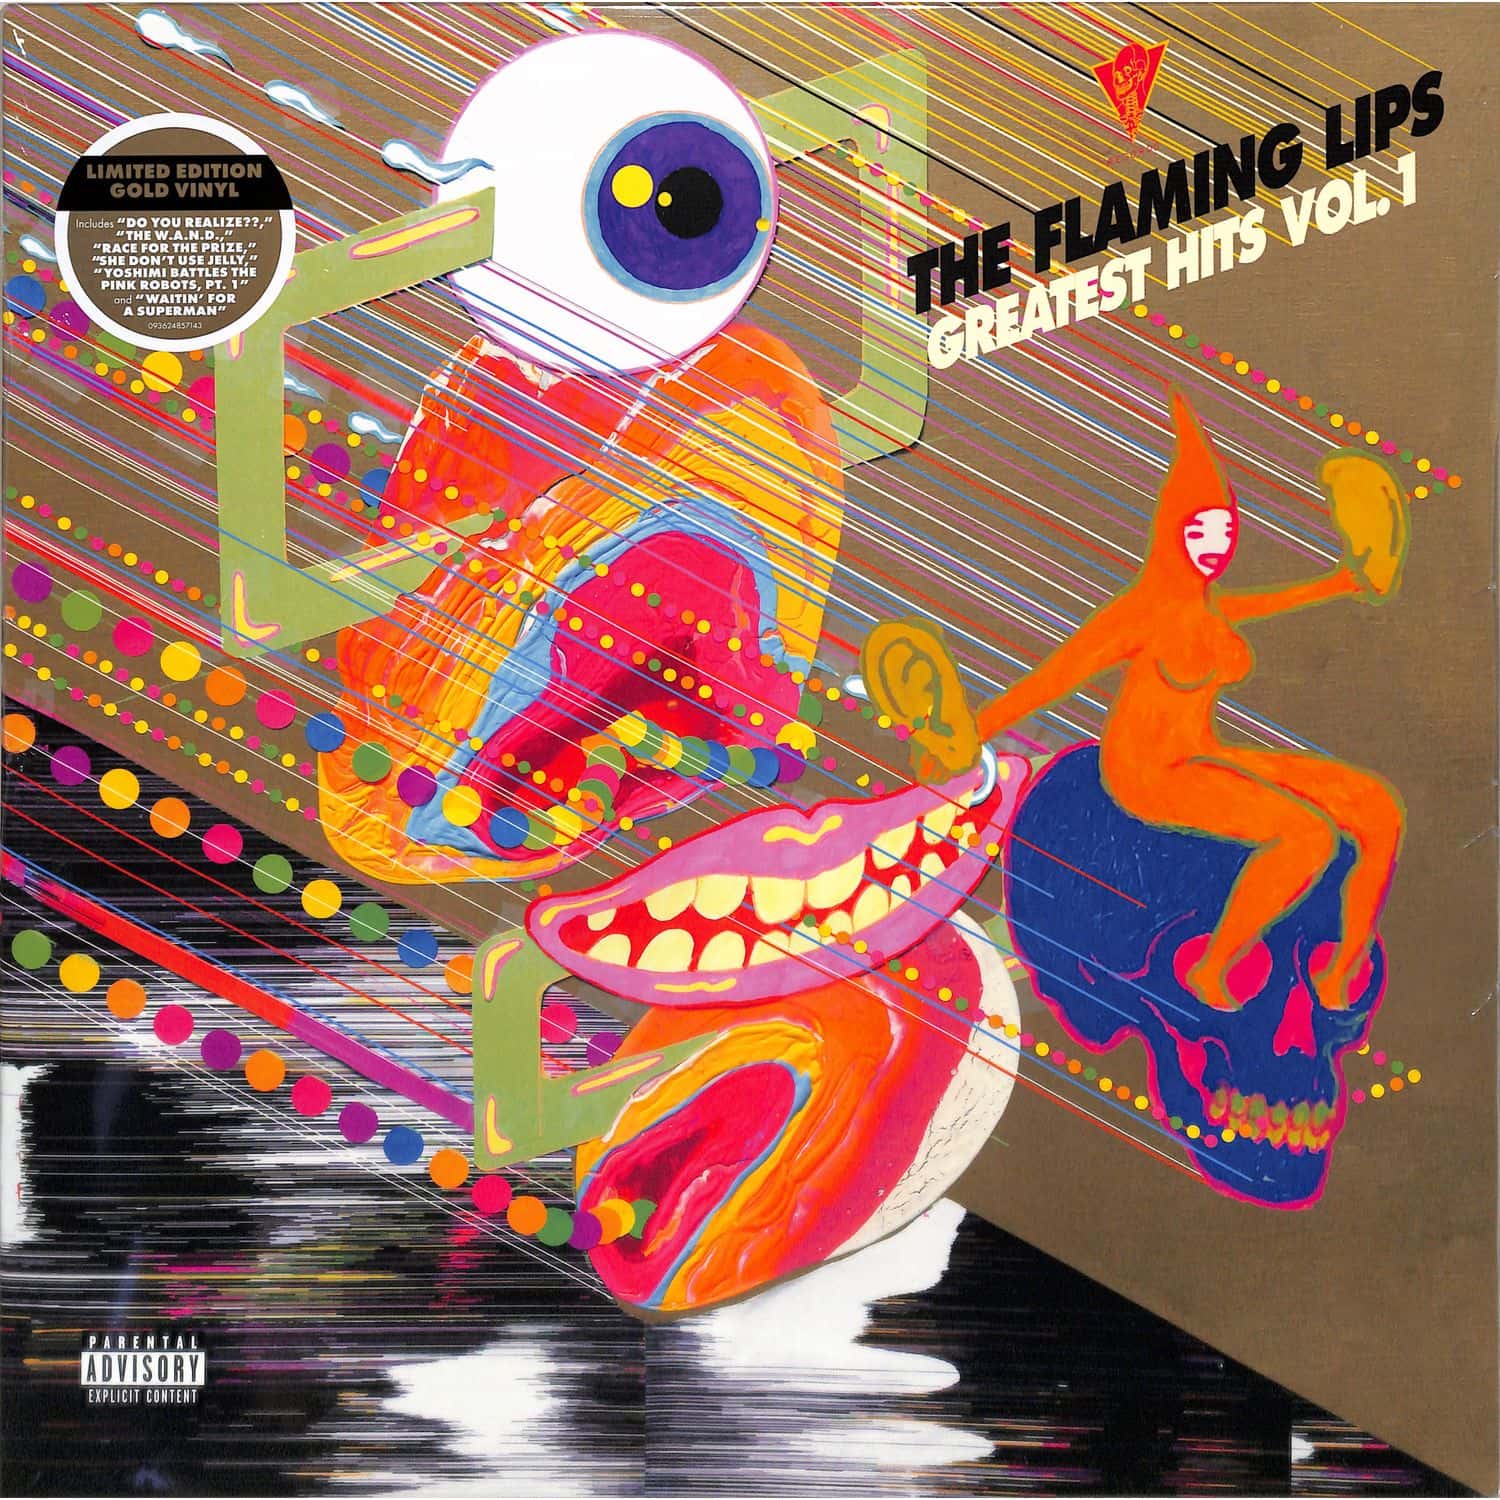 The Flaming Lips - GREATEST HITS, VOL. 1 